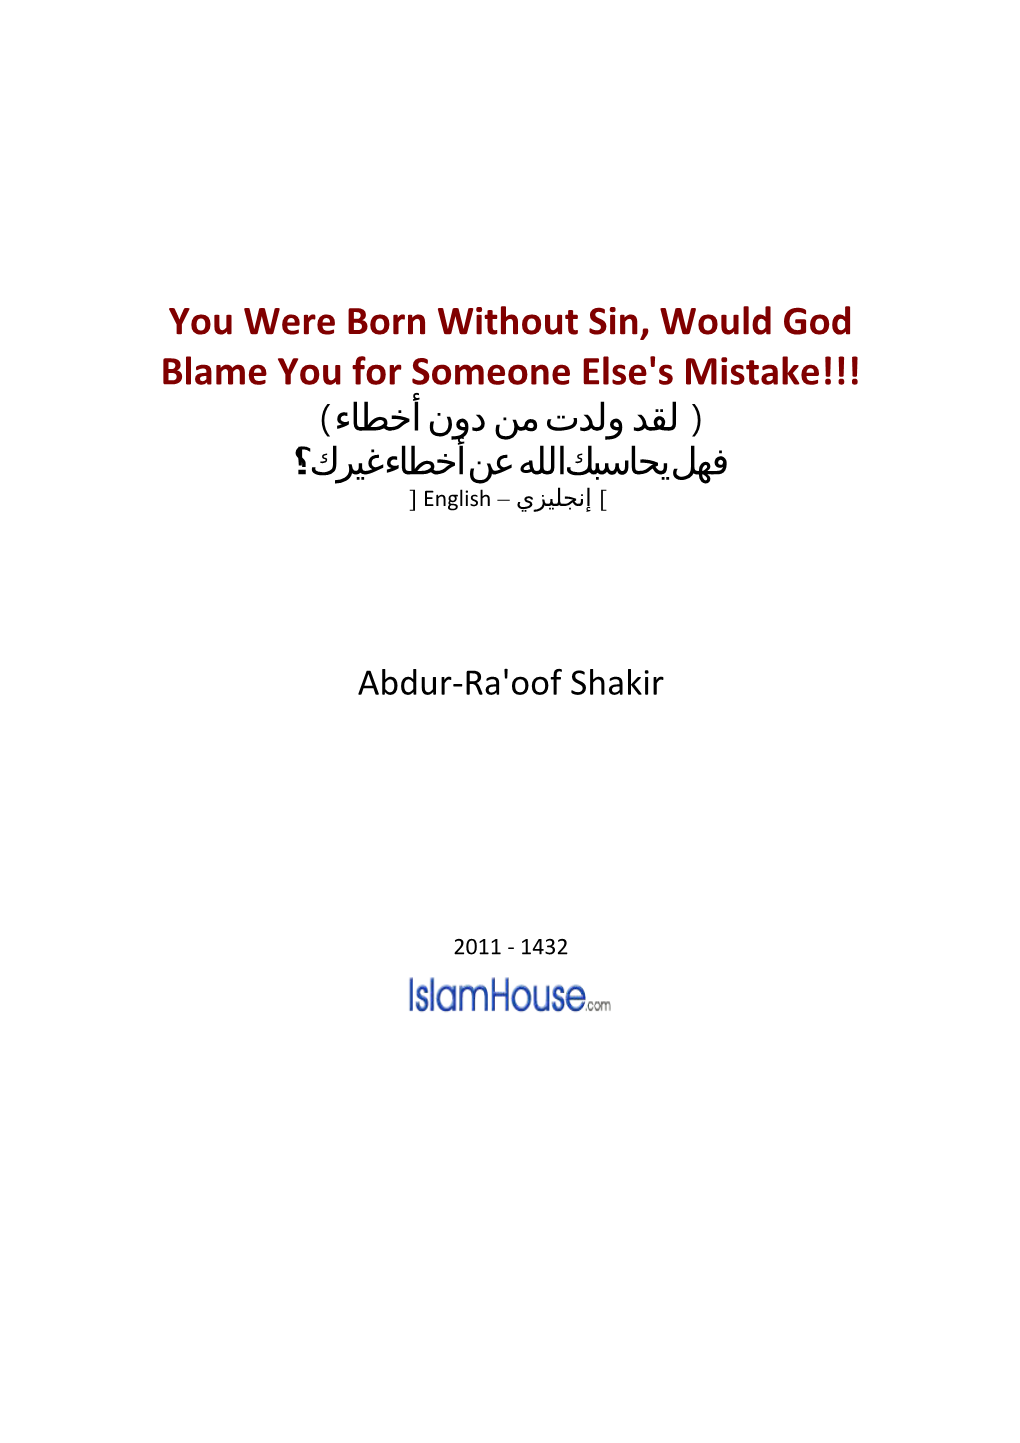 You Were Born Without Sin, Would God Blame You for Someone Else's Mistake